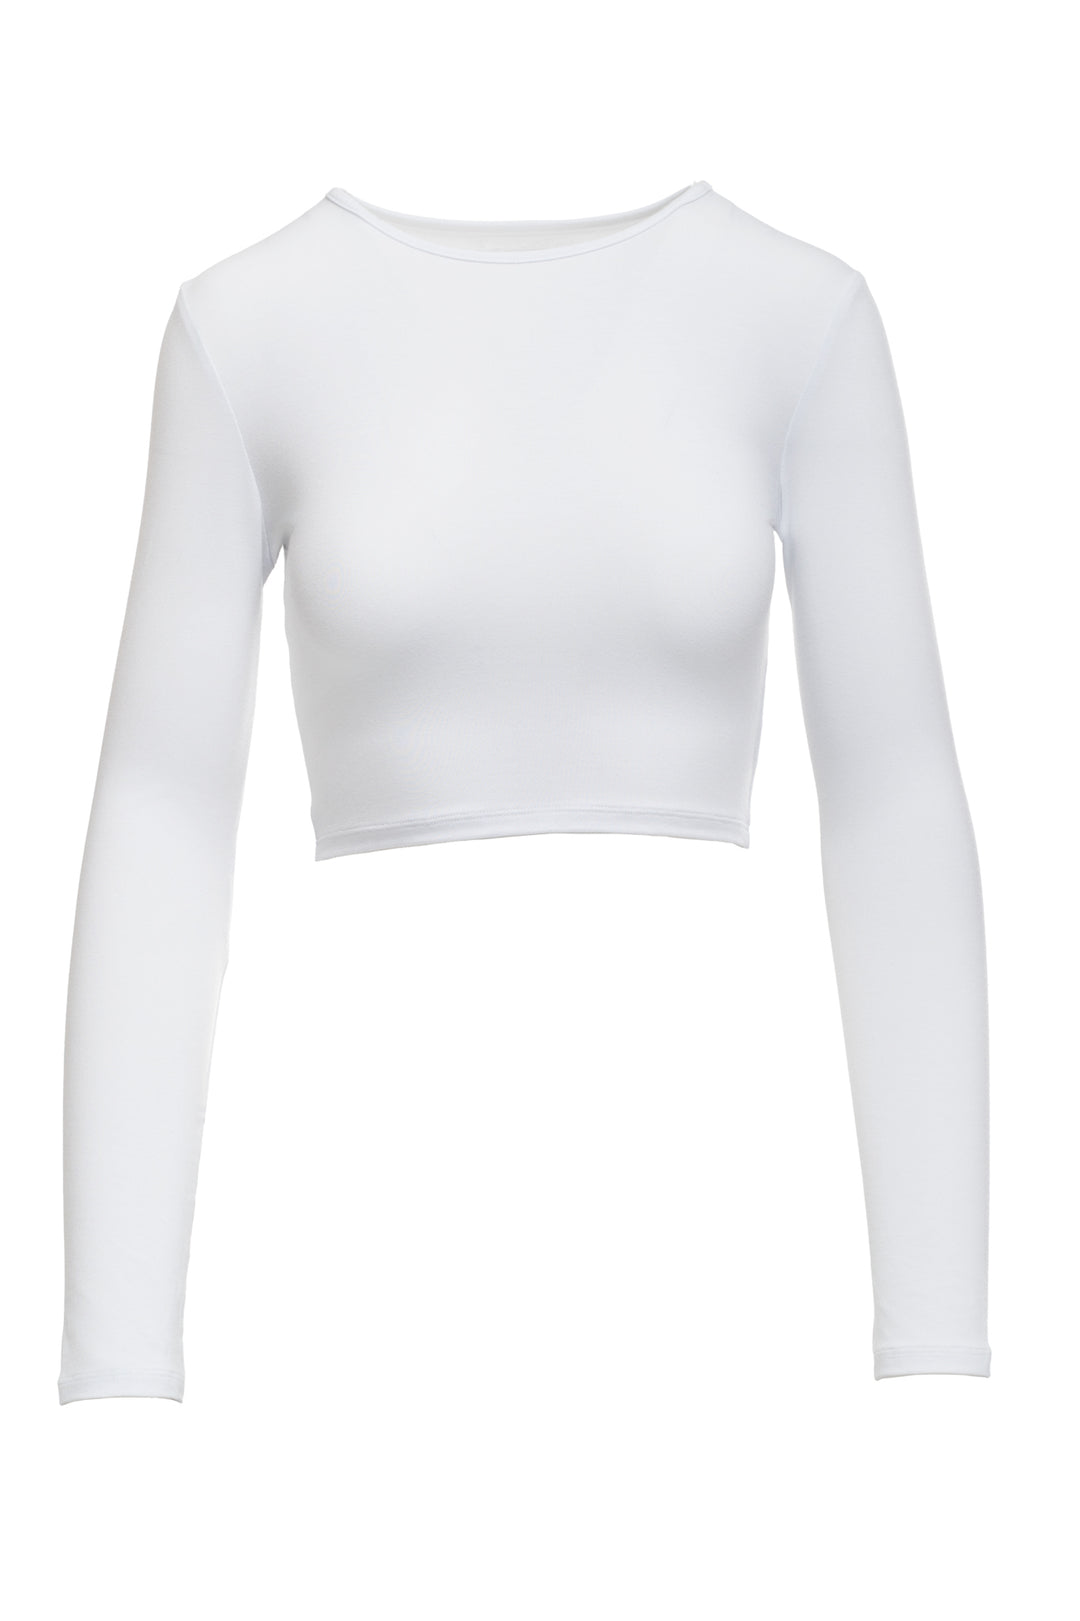 White long sleeve fitted crop top